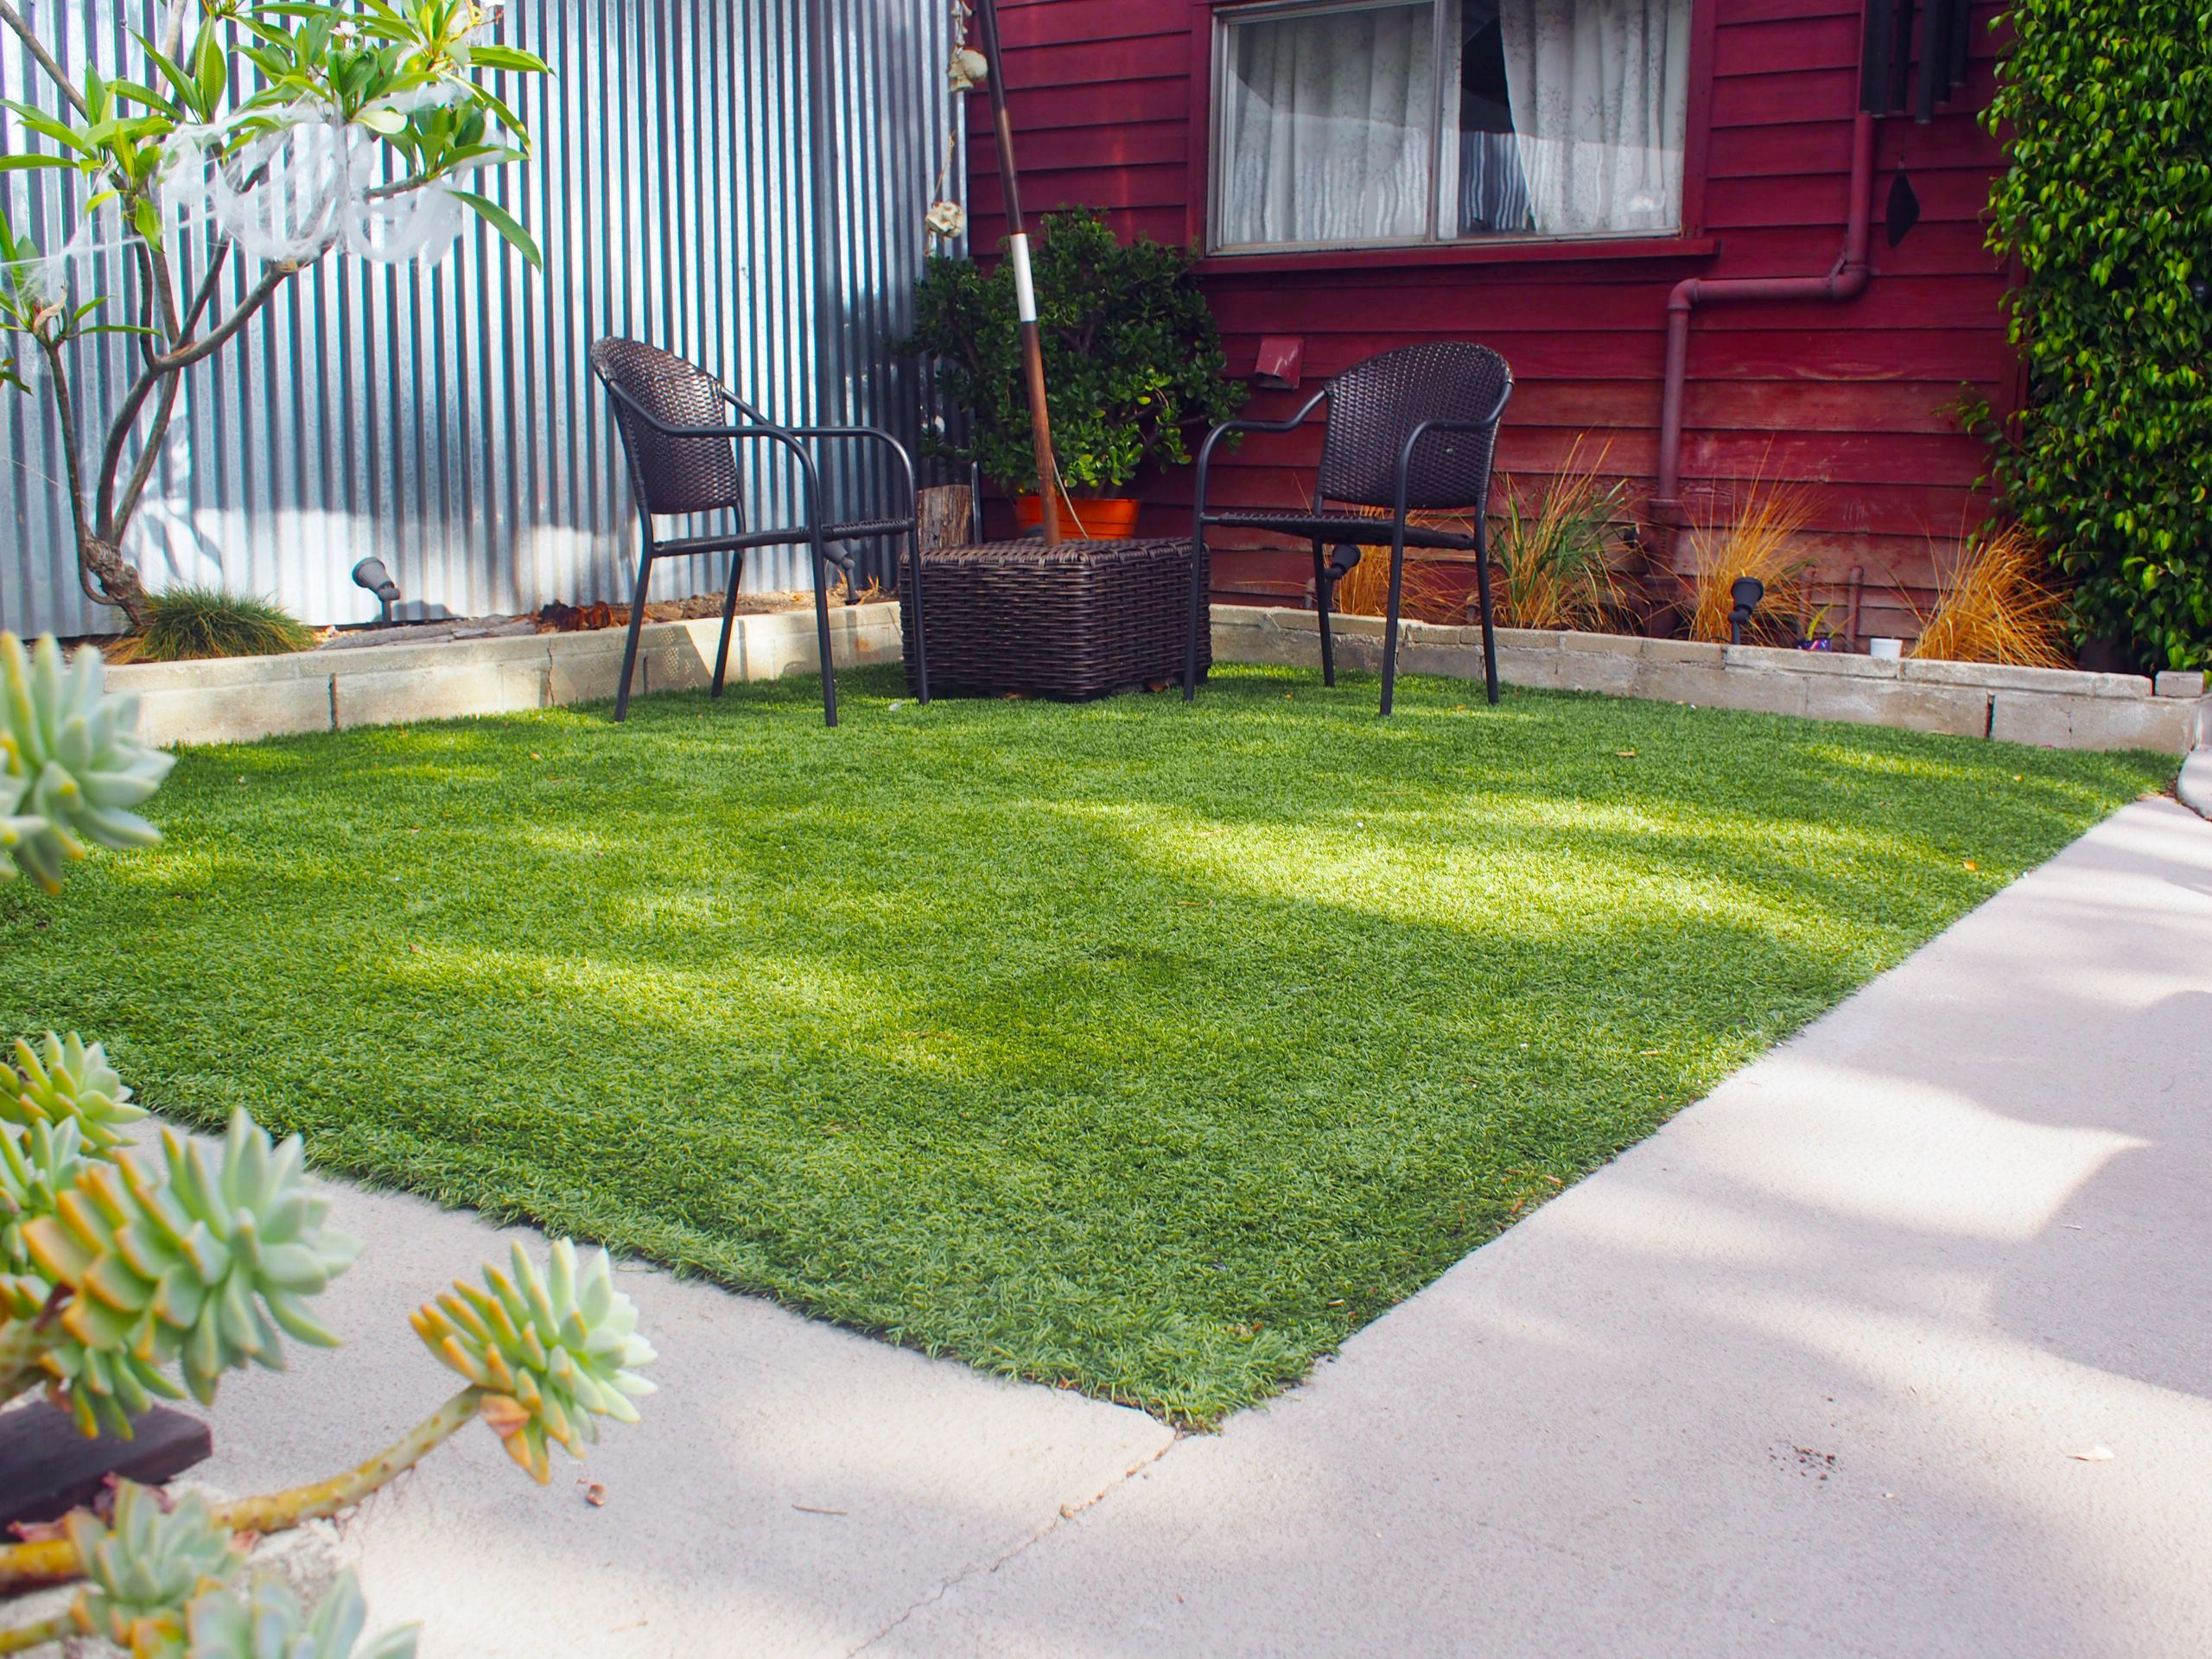 How To Lay Artificial Grass, Can You Lay Artificial Grass On Patio Slabs